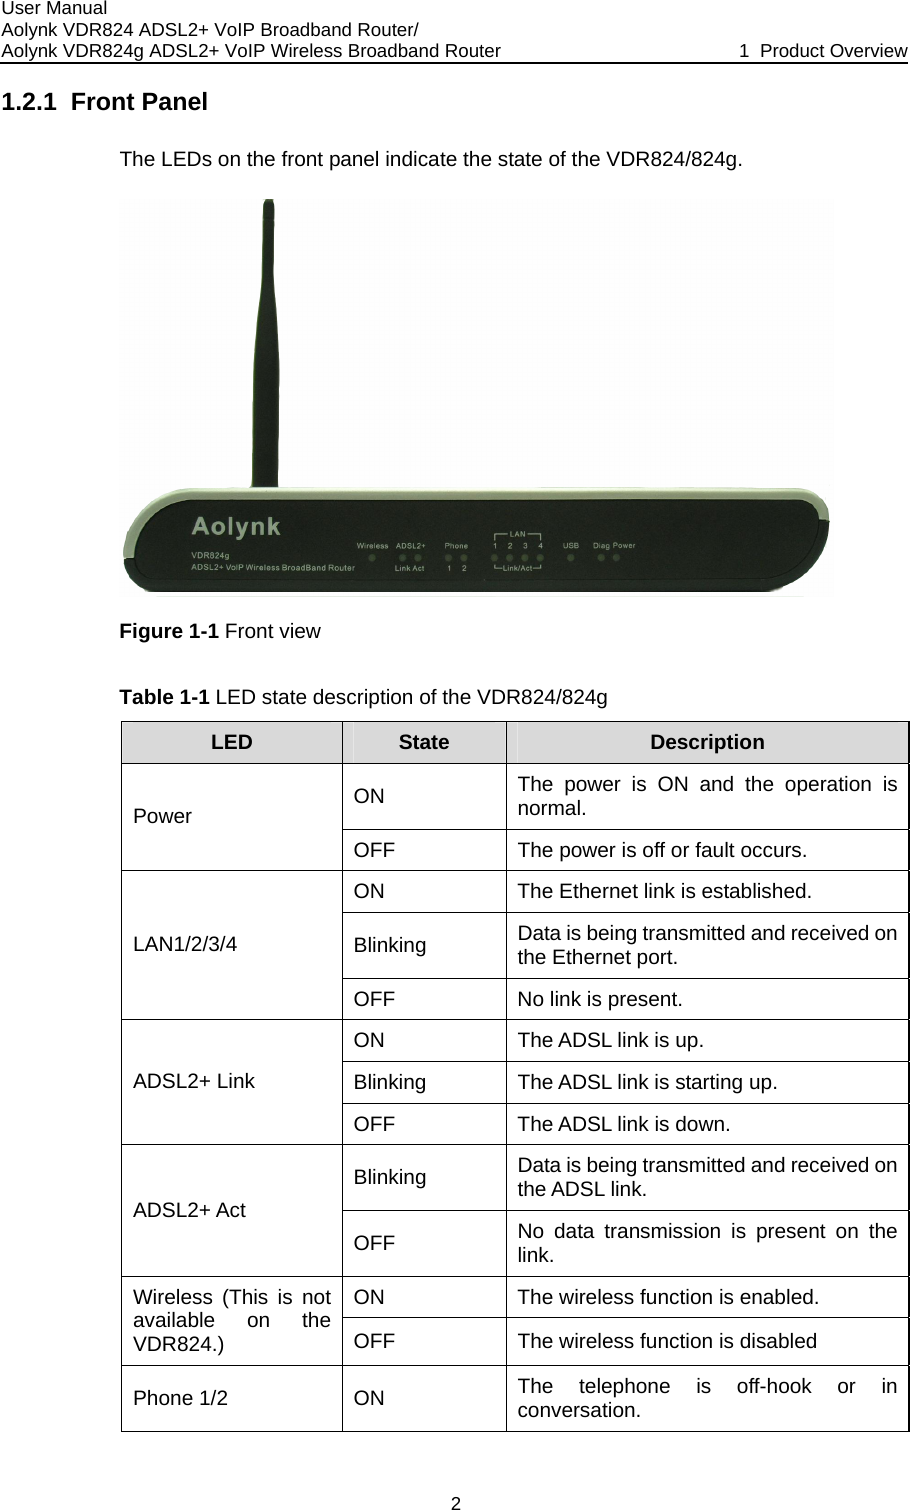 User Manual Aolynk VDR824 ADSL2+ VoIP Broadband Router/ Aolynk VDR824g ADSL2+ VoIP Wireless Broadband Router  1  Product Overview 2 1.2.1  Front Panel The LEDs on the front panel indicate the state of the VDR824/824g.  Figure 1- t view Table 1-1 LED state description of the VDR1 Fron824/824g LED State Description ON The power is ON and the opernormal. ation is Power OFF  The power is off or fault occurs. ON  The Ethernet link is established. Blinking  ted and received on Data is being transmitthe Ethernet port. LAN1/2/3/4 OFF  No link is present. ON The ADSL link is up. Blinking The ADSL link is starting up. ADSL2+ Link OFF  The ADSL link is down. Blinking  s being transmitted and received on Data ithe ADSL link. ADSL2+ Act OFF  No data transmission is presentlink.  on the ON  The wireless function is enabled. Wireless (This is not available on the  sabled VDR824.)  OFF  The wireless function is diPhone 1/2  ON  The telephone is off-hook or in conversation. 